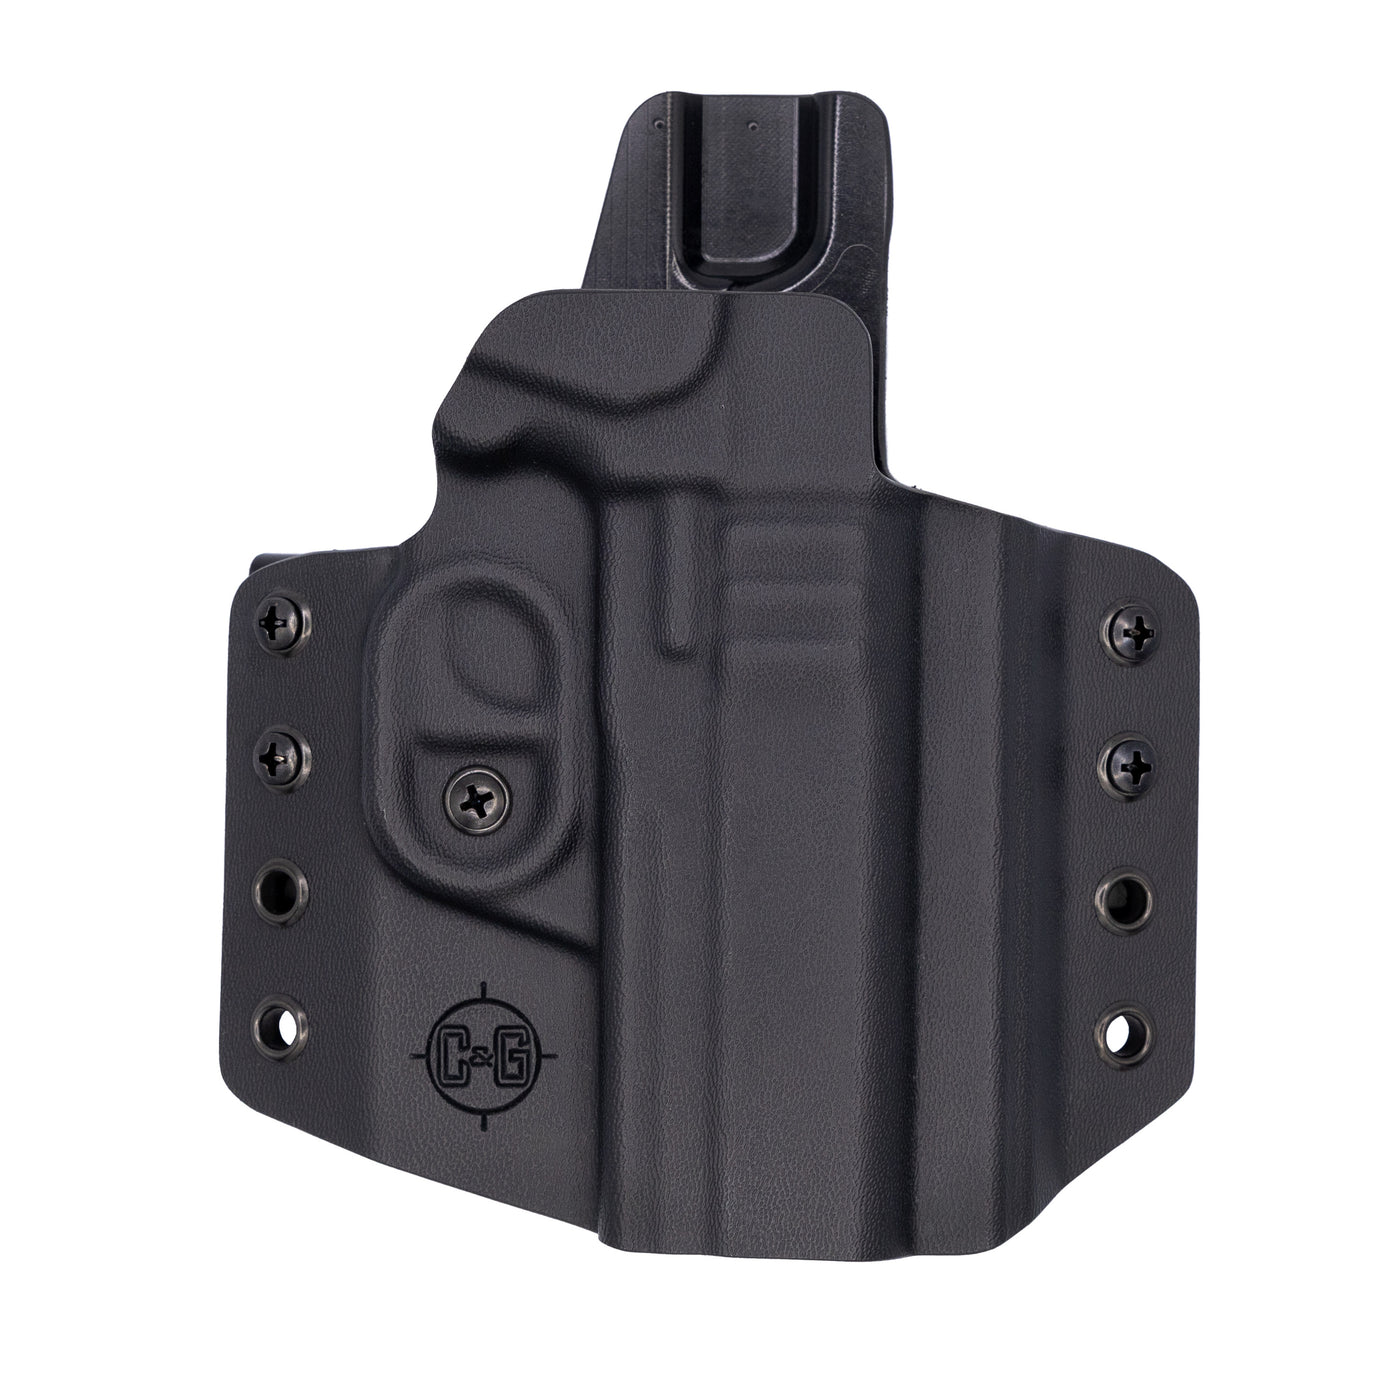 C&G Holsters OWB holster for the Staccato C2